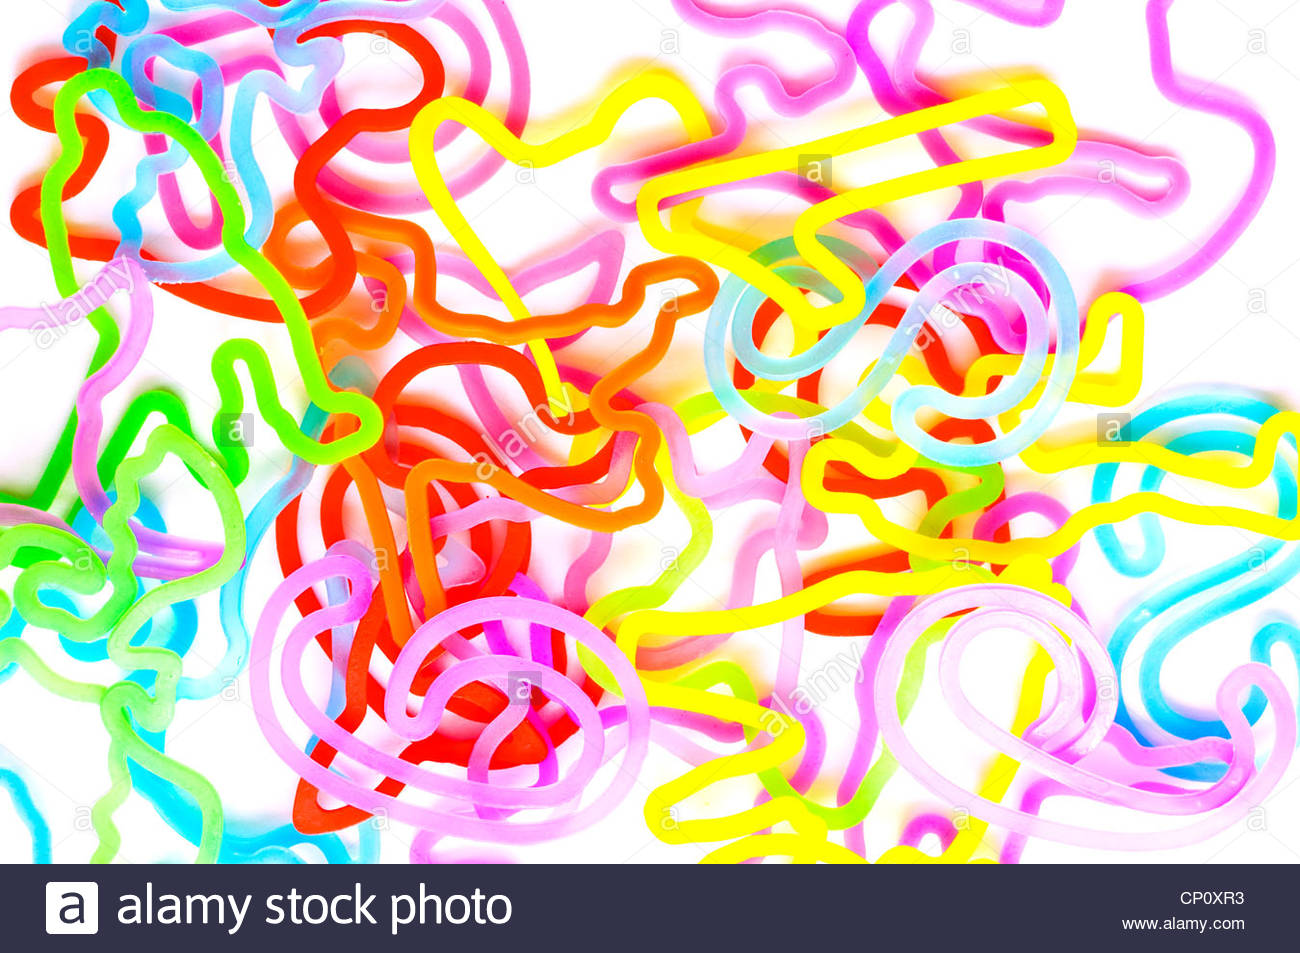 Collection Of Silly Bandz Colored Rubber Silicone Bands With